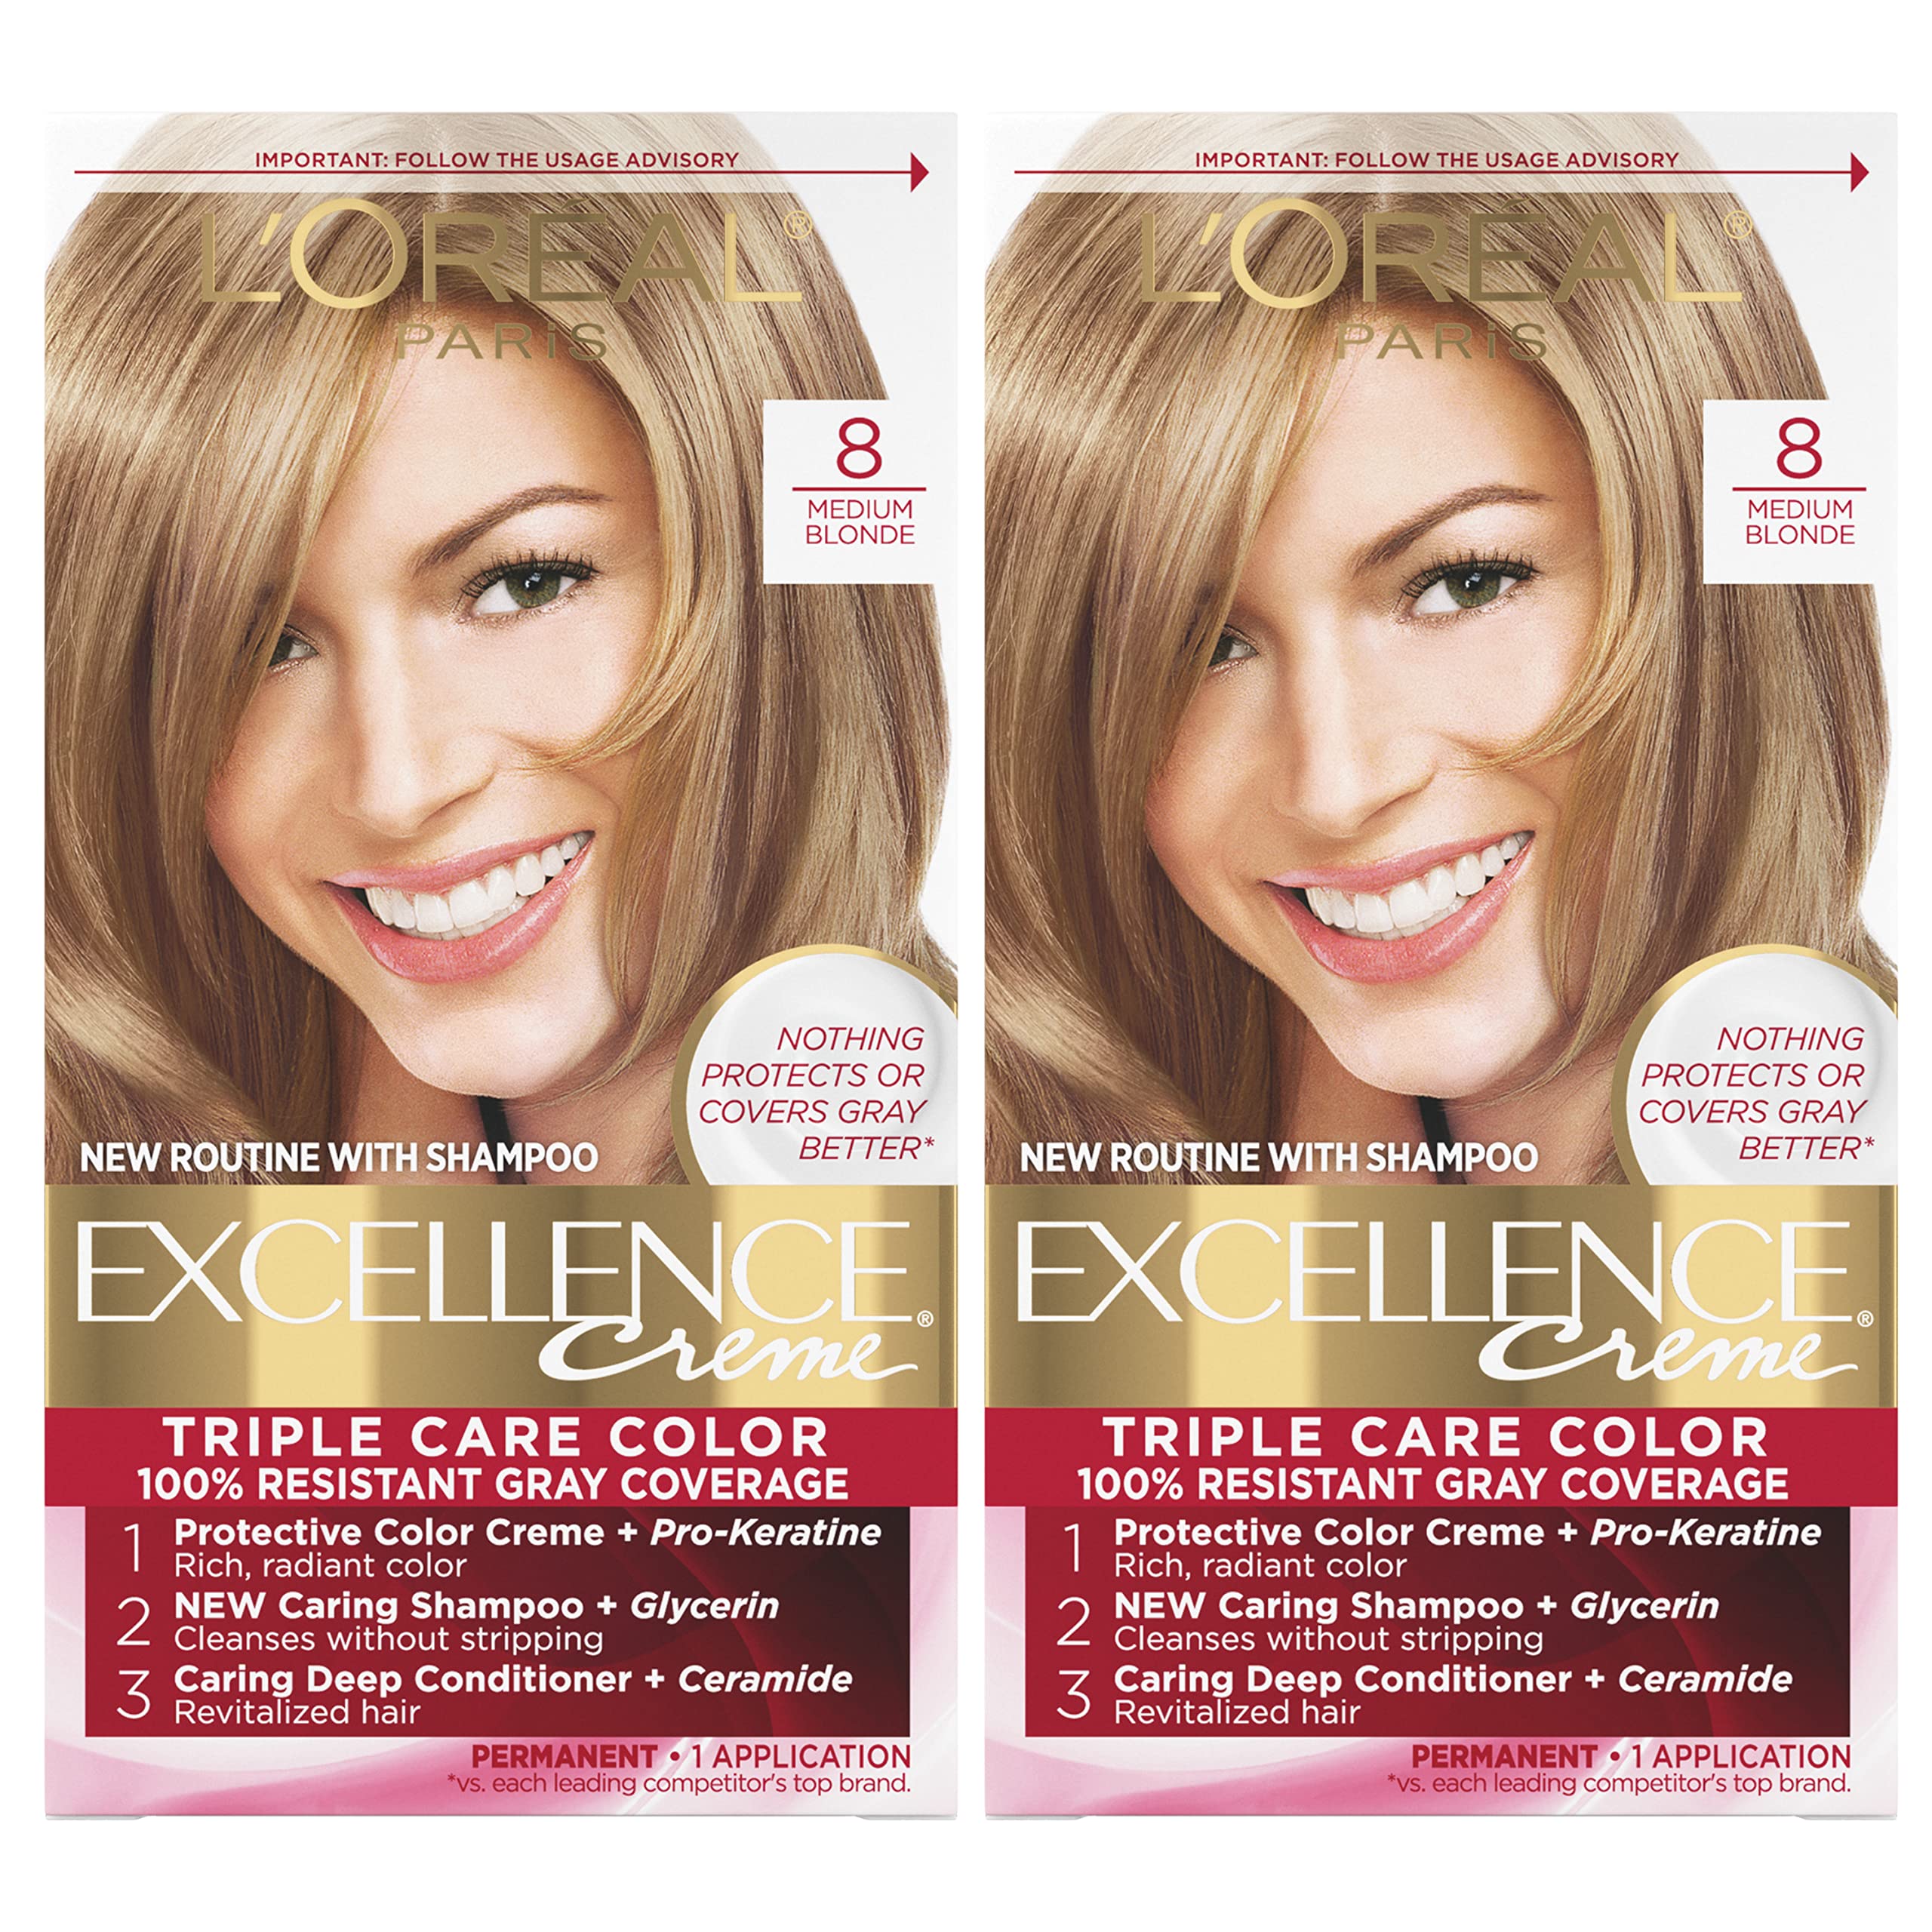 L'Oreal Paris Excellence Creme Permanent Hair Color, 8 Medium Blonde, 100 percent Gray Coverage Hair Dye, Pack of 2